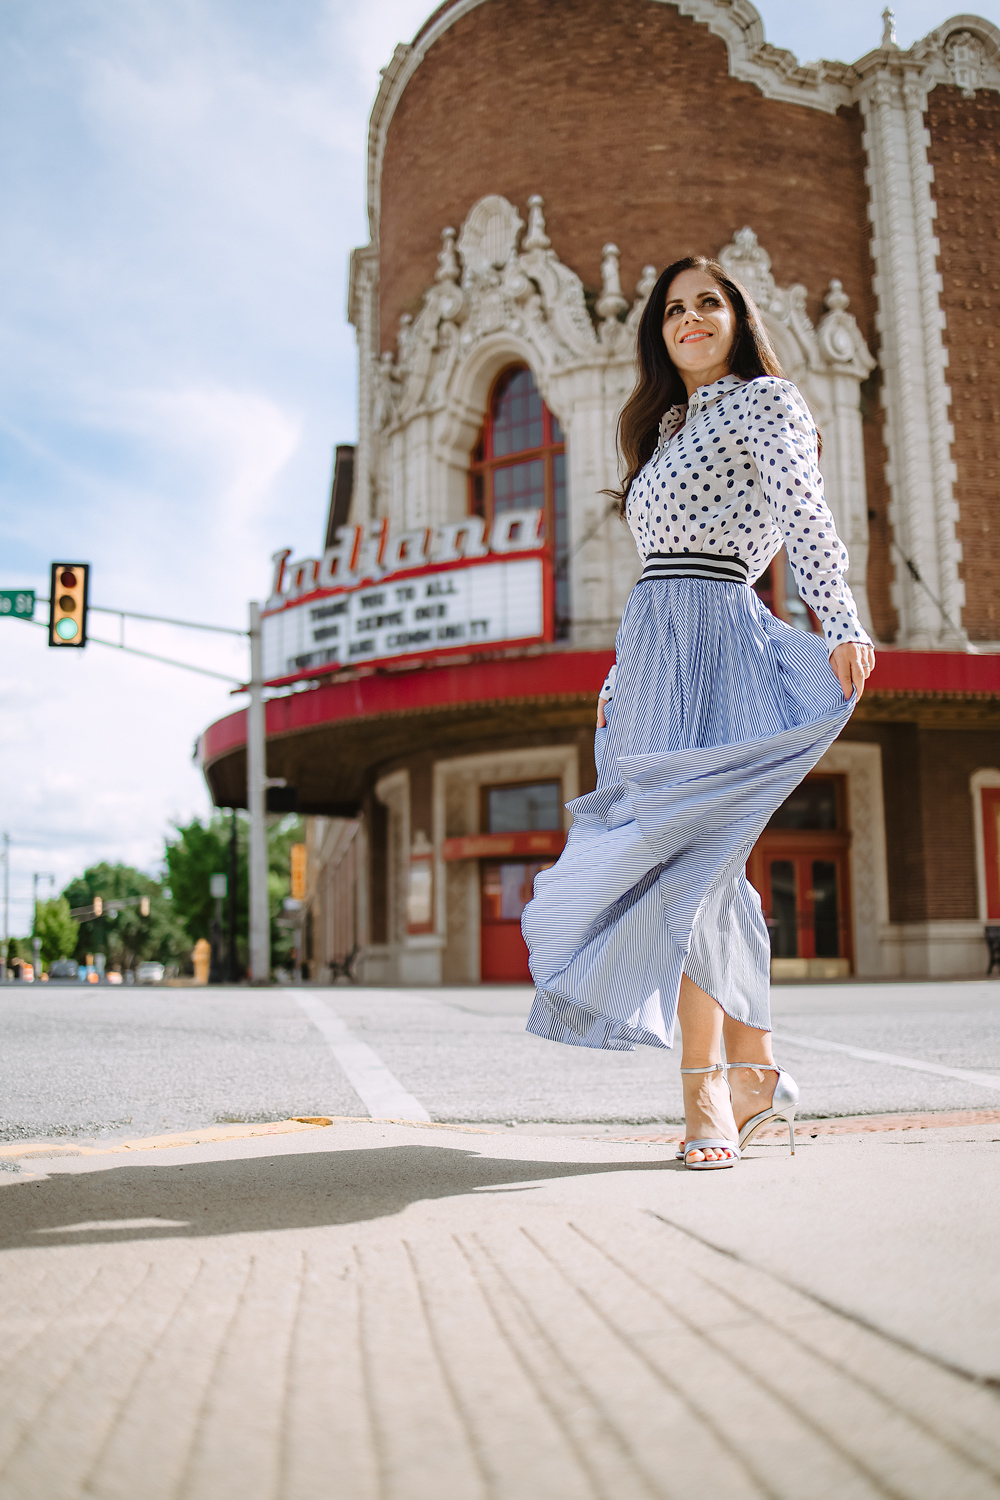 woman swishing skirt in front of historic theater